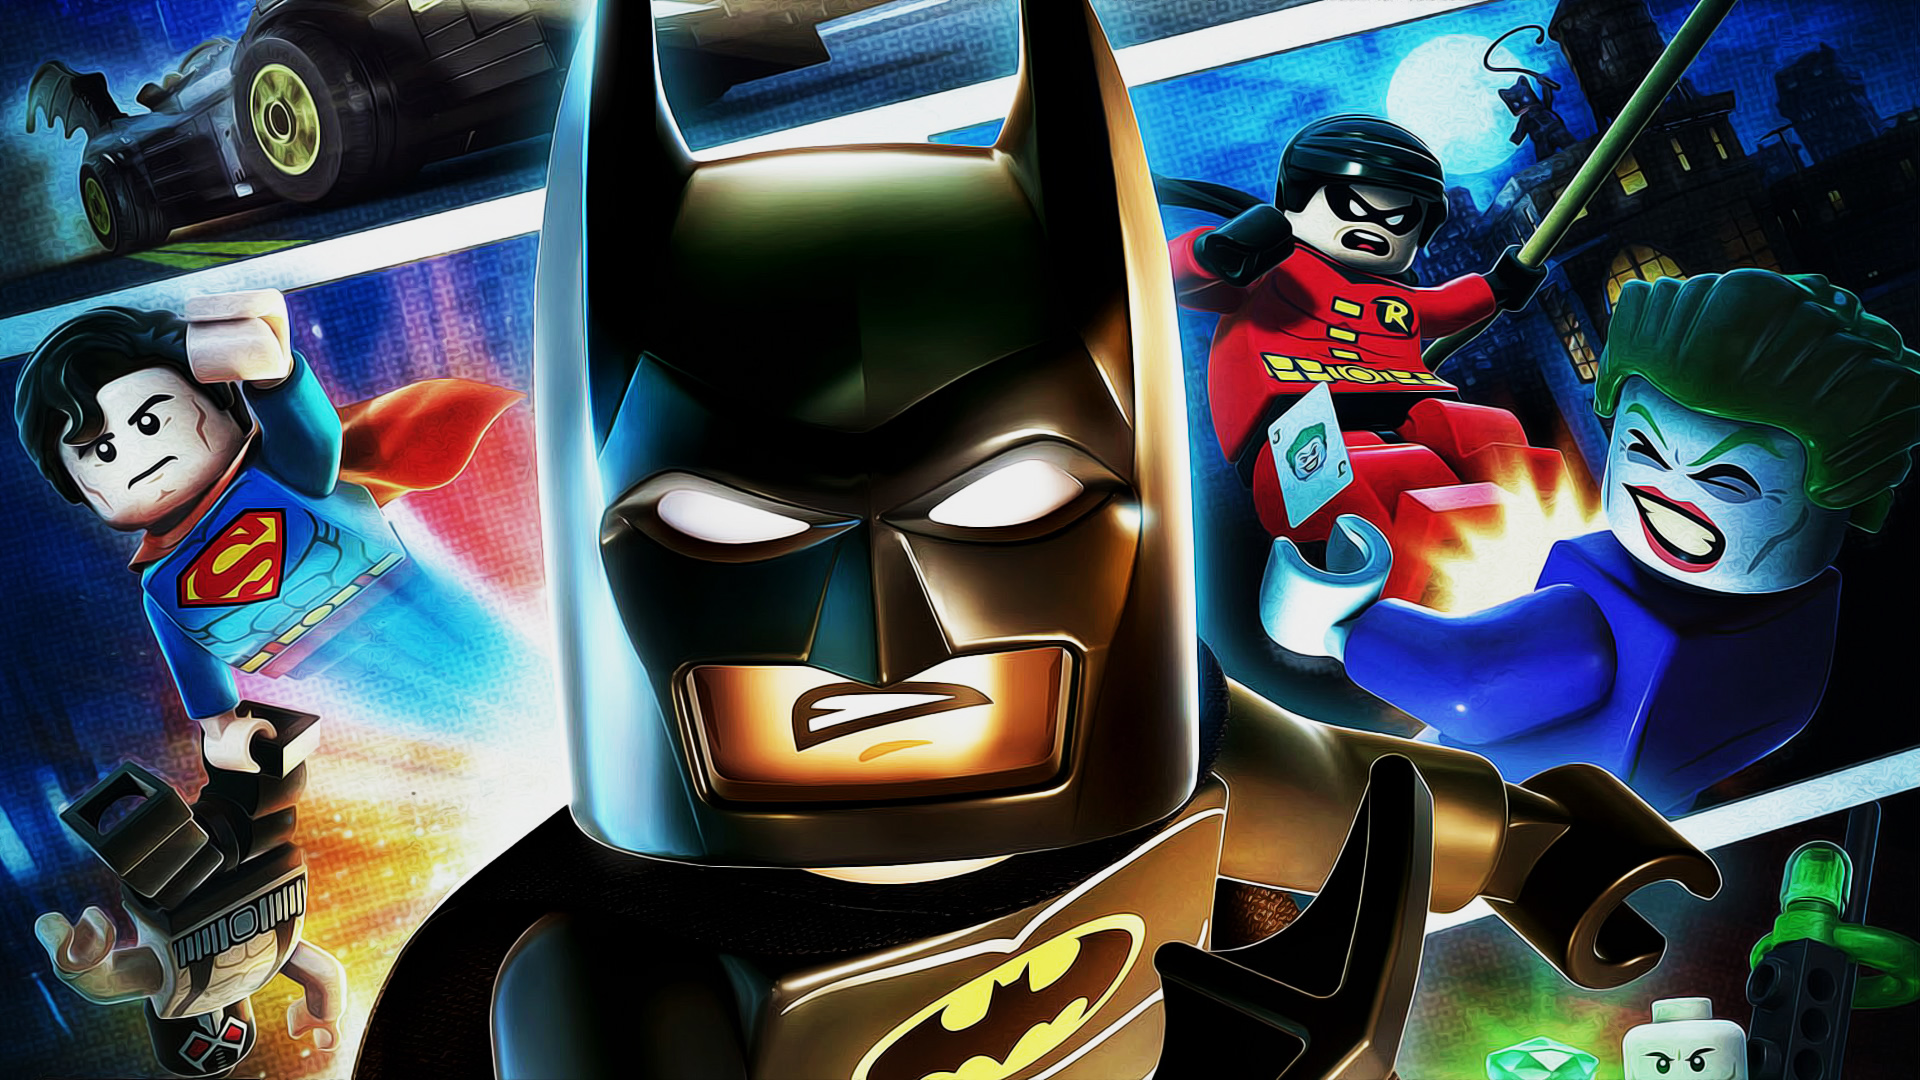 Will Arnett is the Batman we deserve in hilarious new The Lego Movie